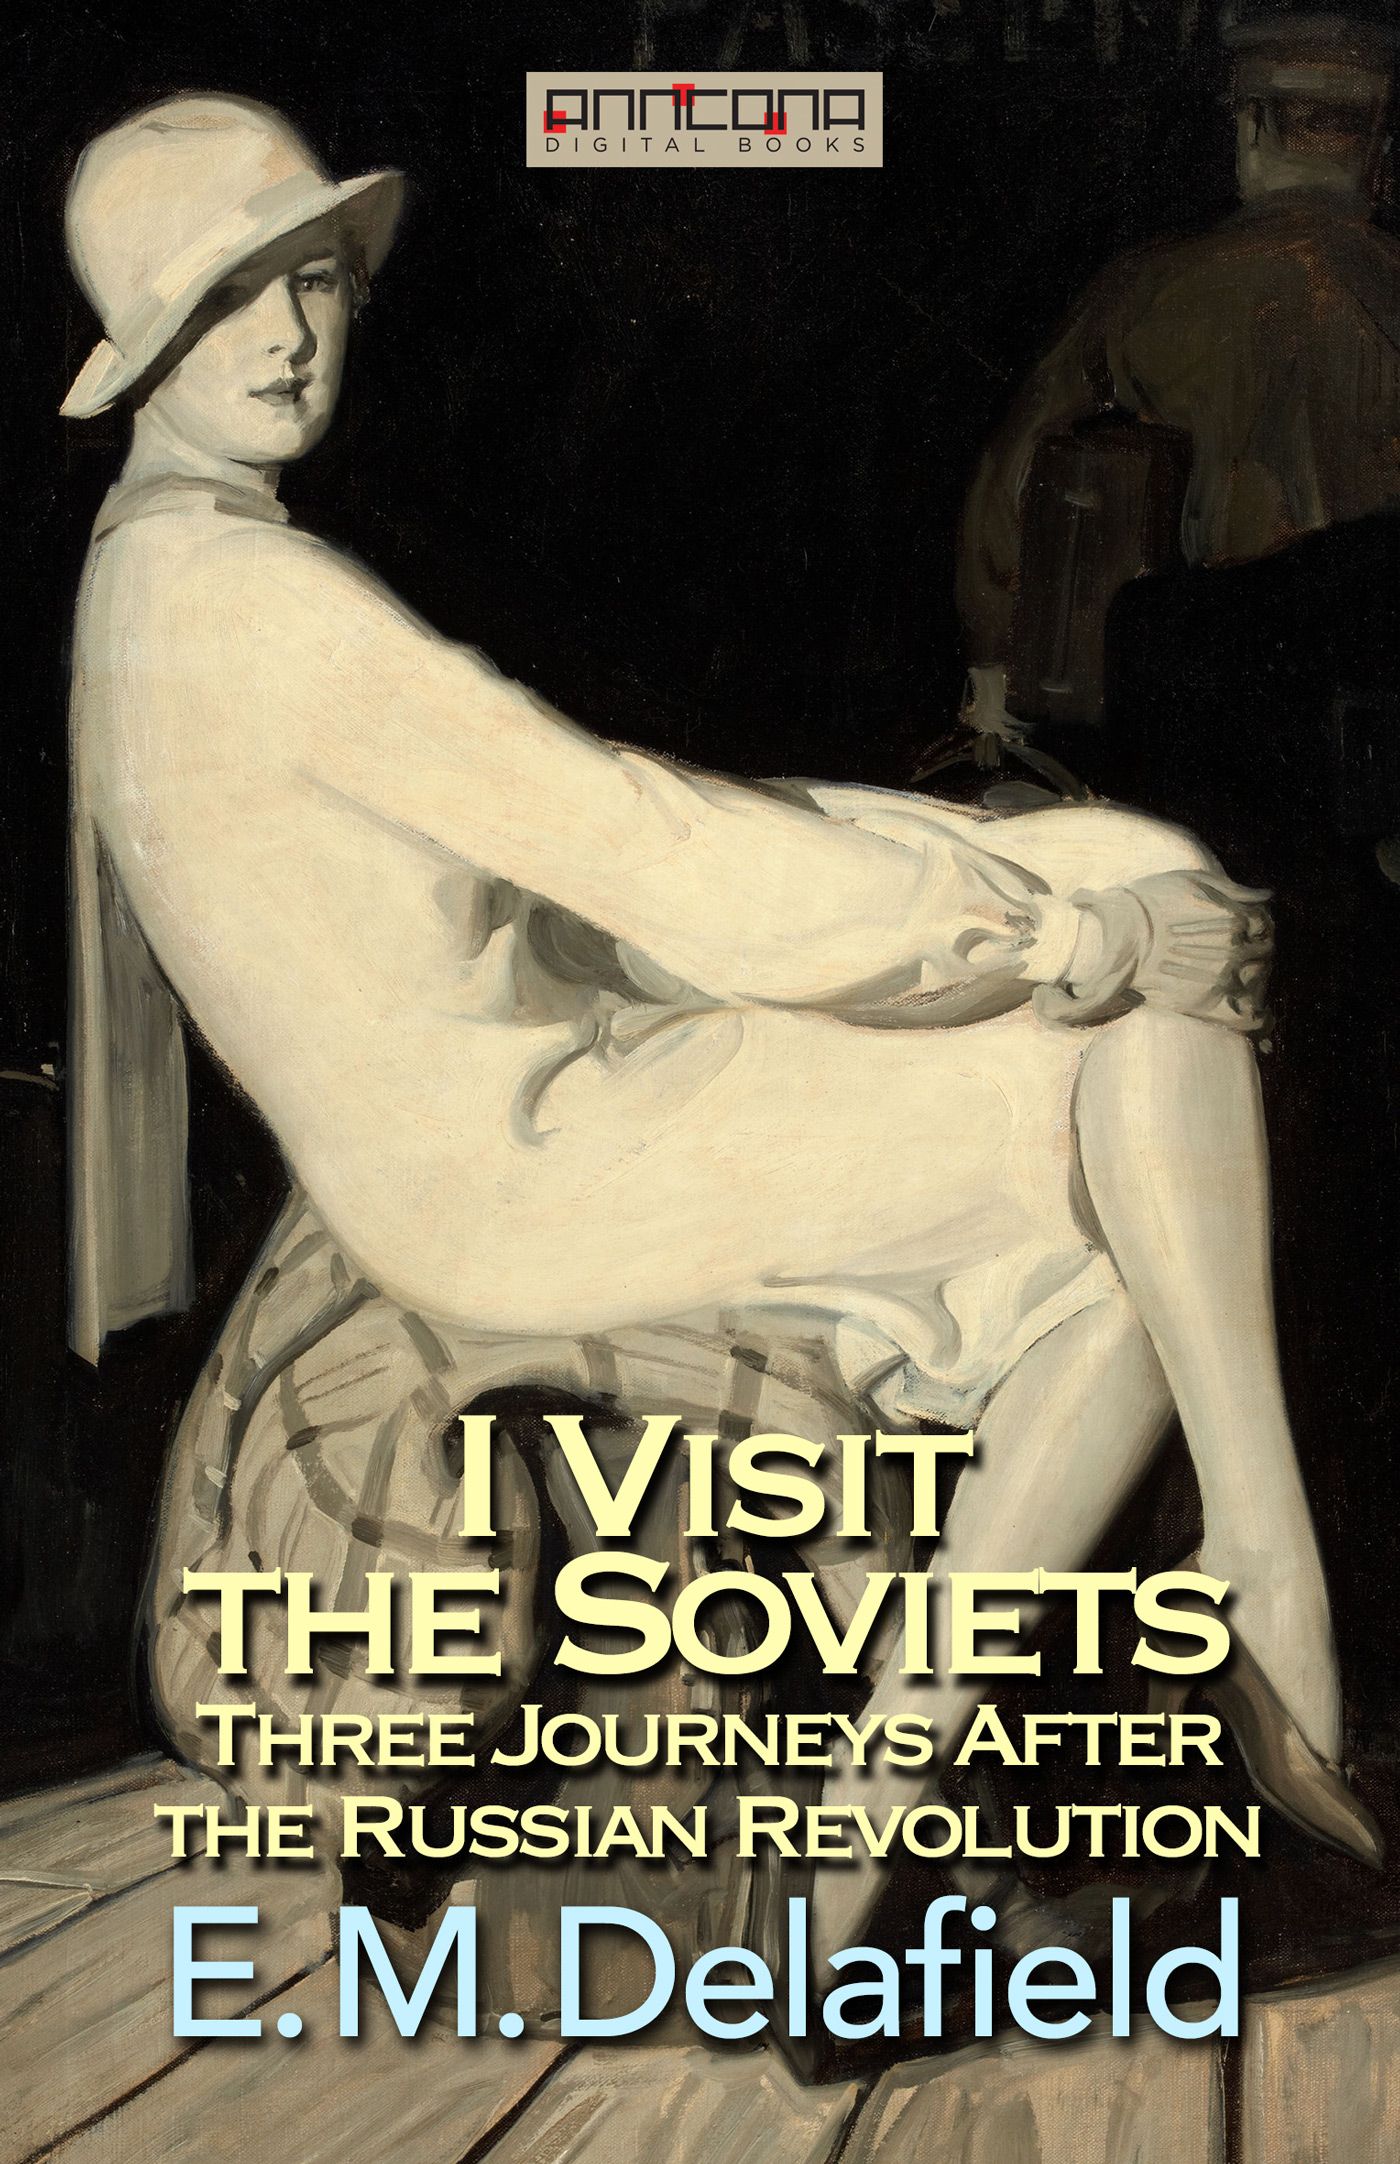 I Visit the Soviets, eBook by E. M. Delafield